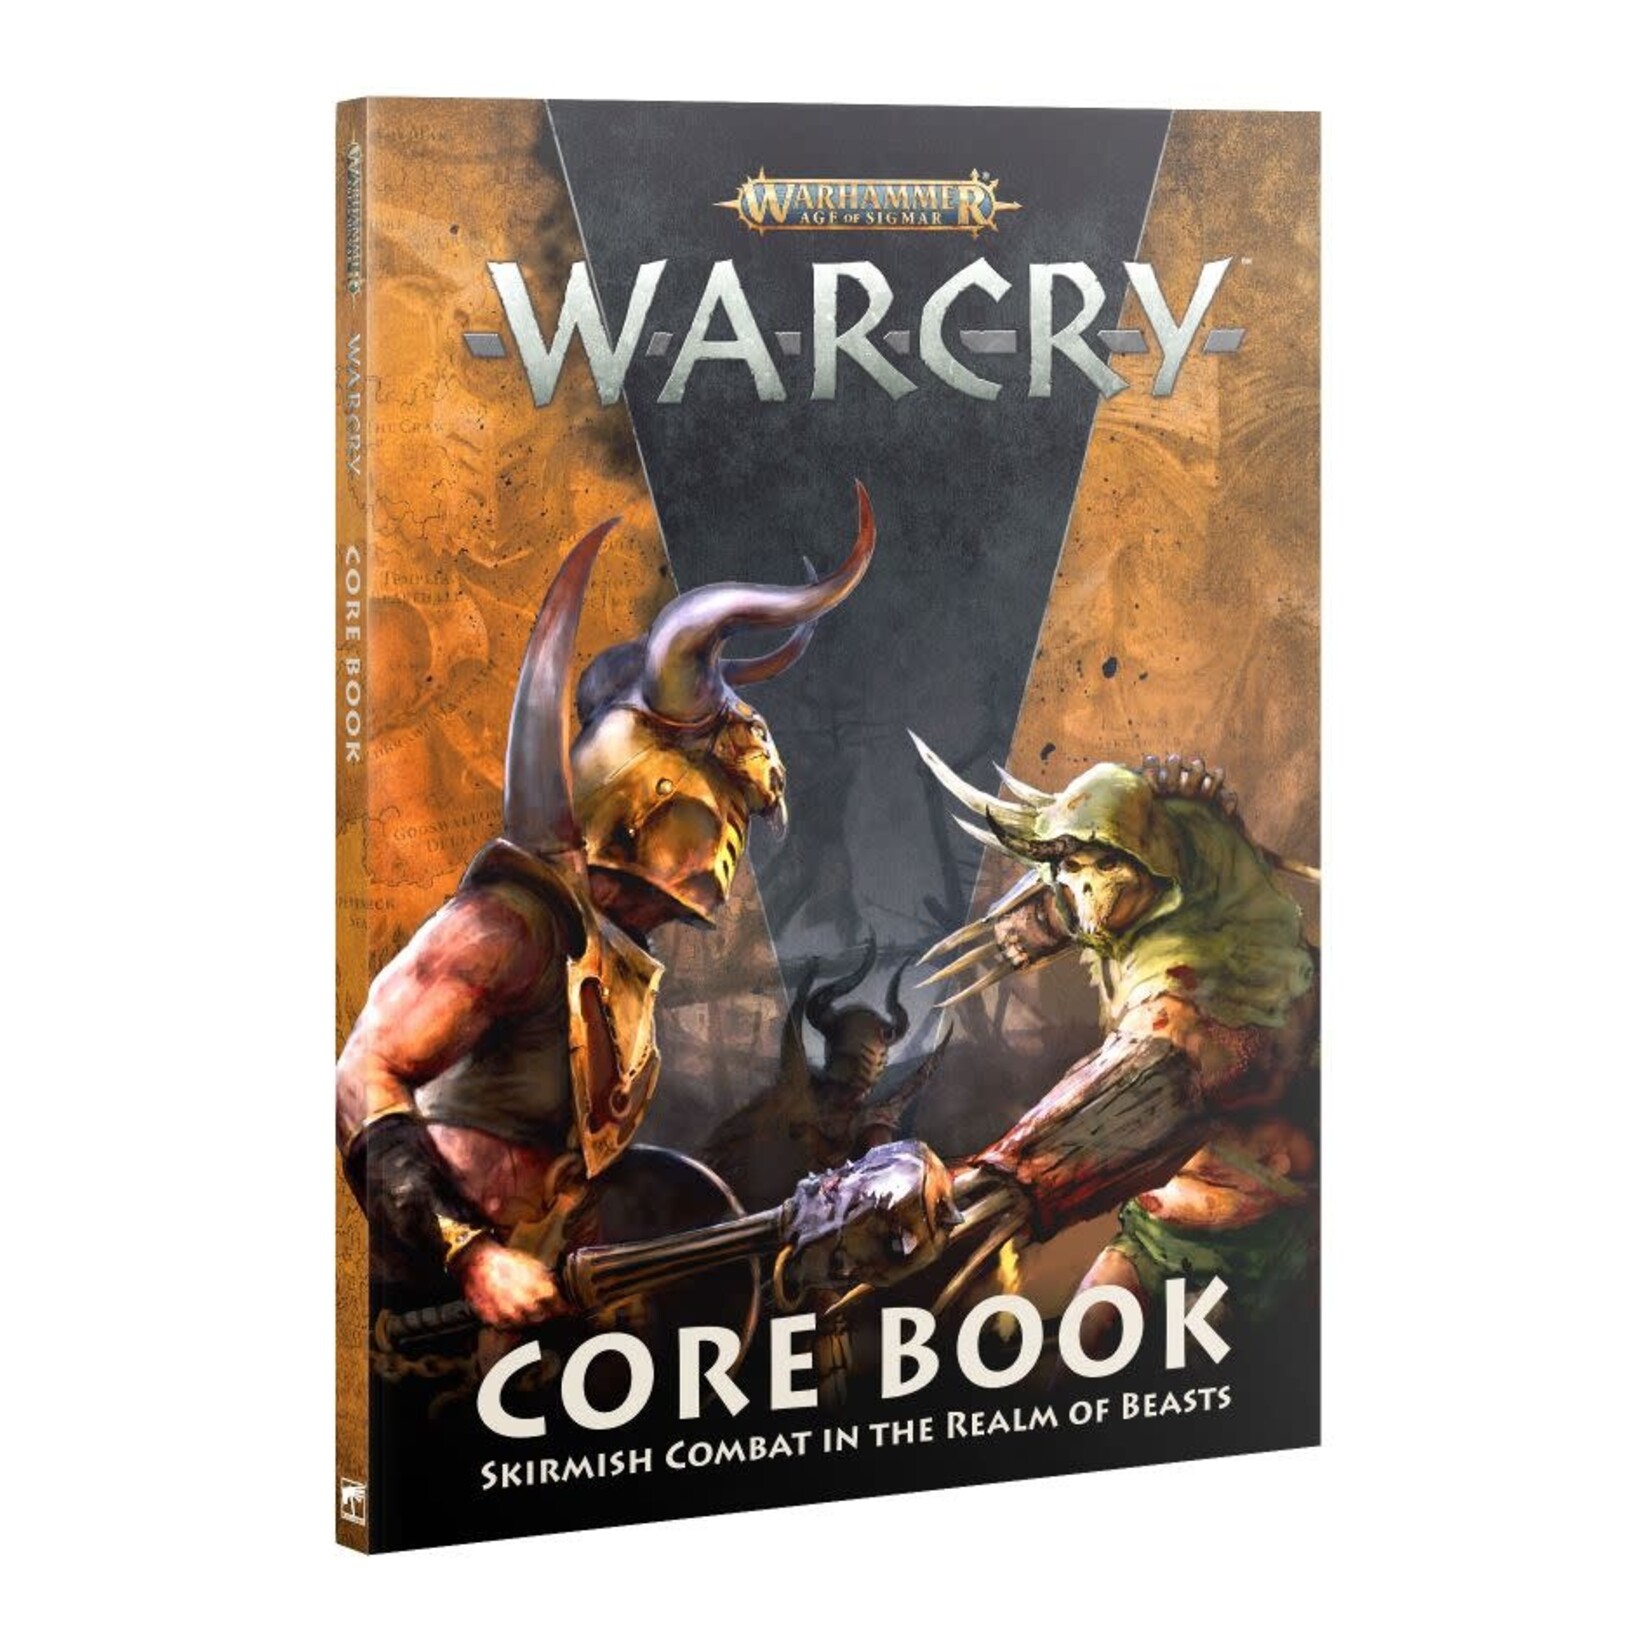 Games Workshop AGE OF SIGMAR: WARCRY CORE BOOK (ENG) 2nd edition